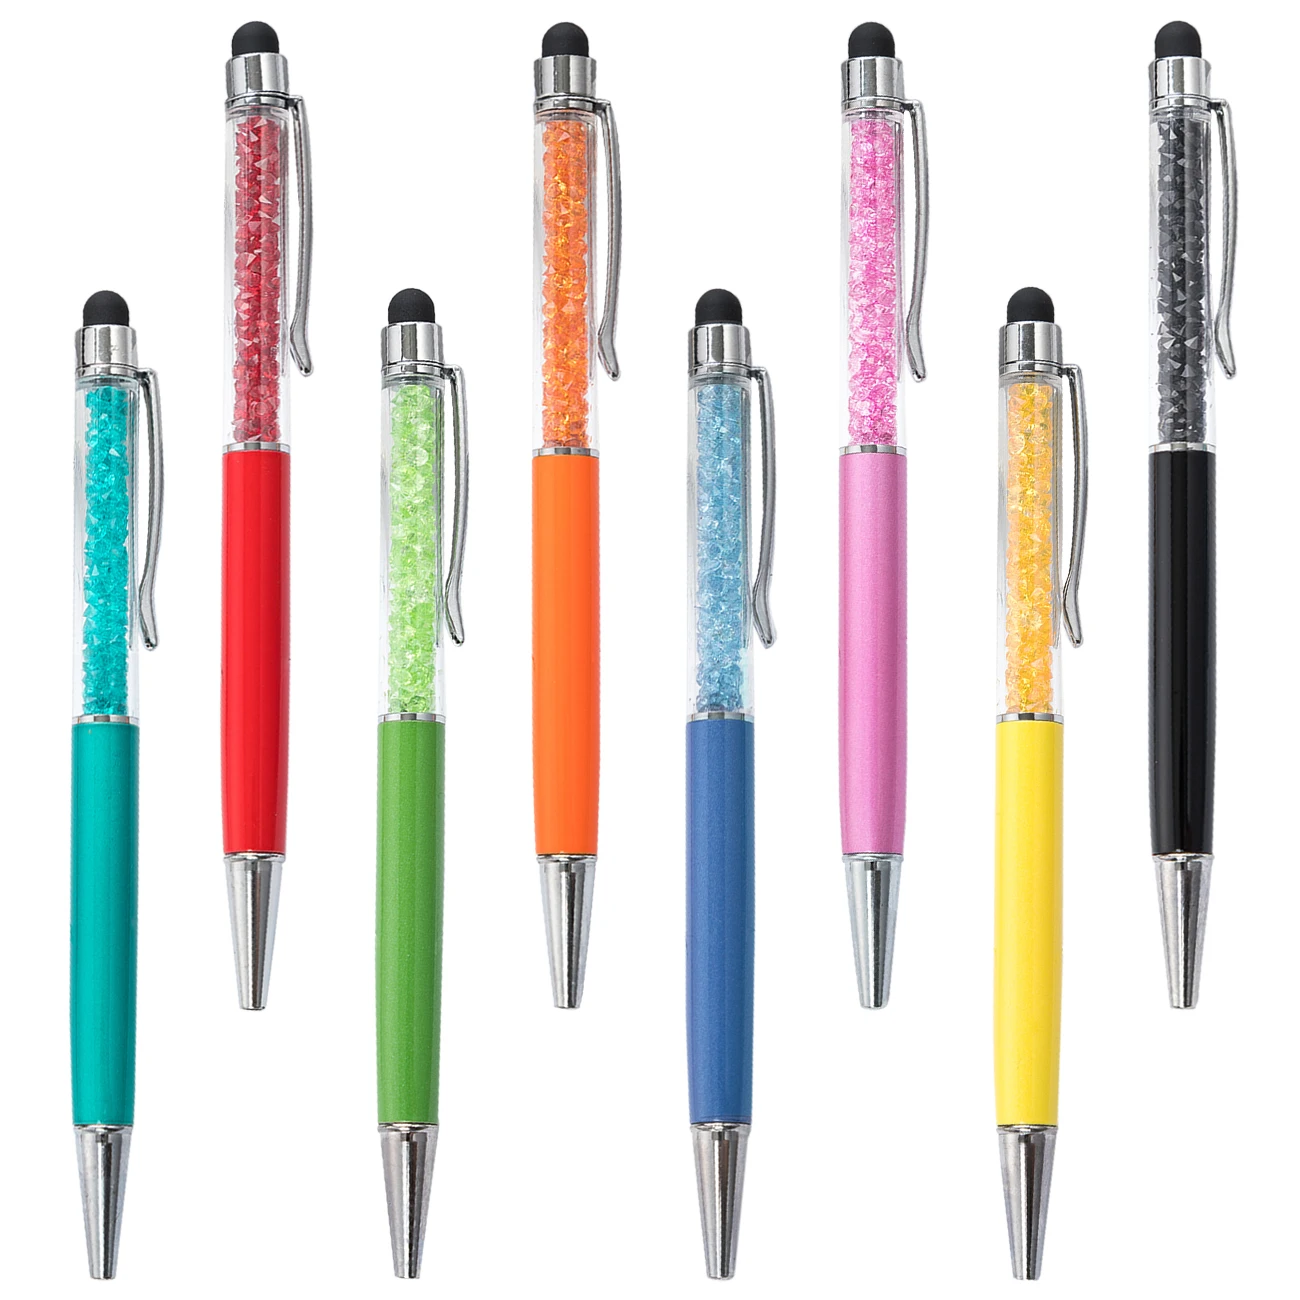 100pcs/lot  26 Colors 2 in 1 Customized Logo Crystal Ballpoint Pen Creative Stylus Touch PenWriting Ballpen Stationery